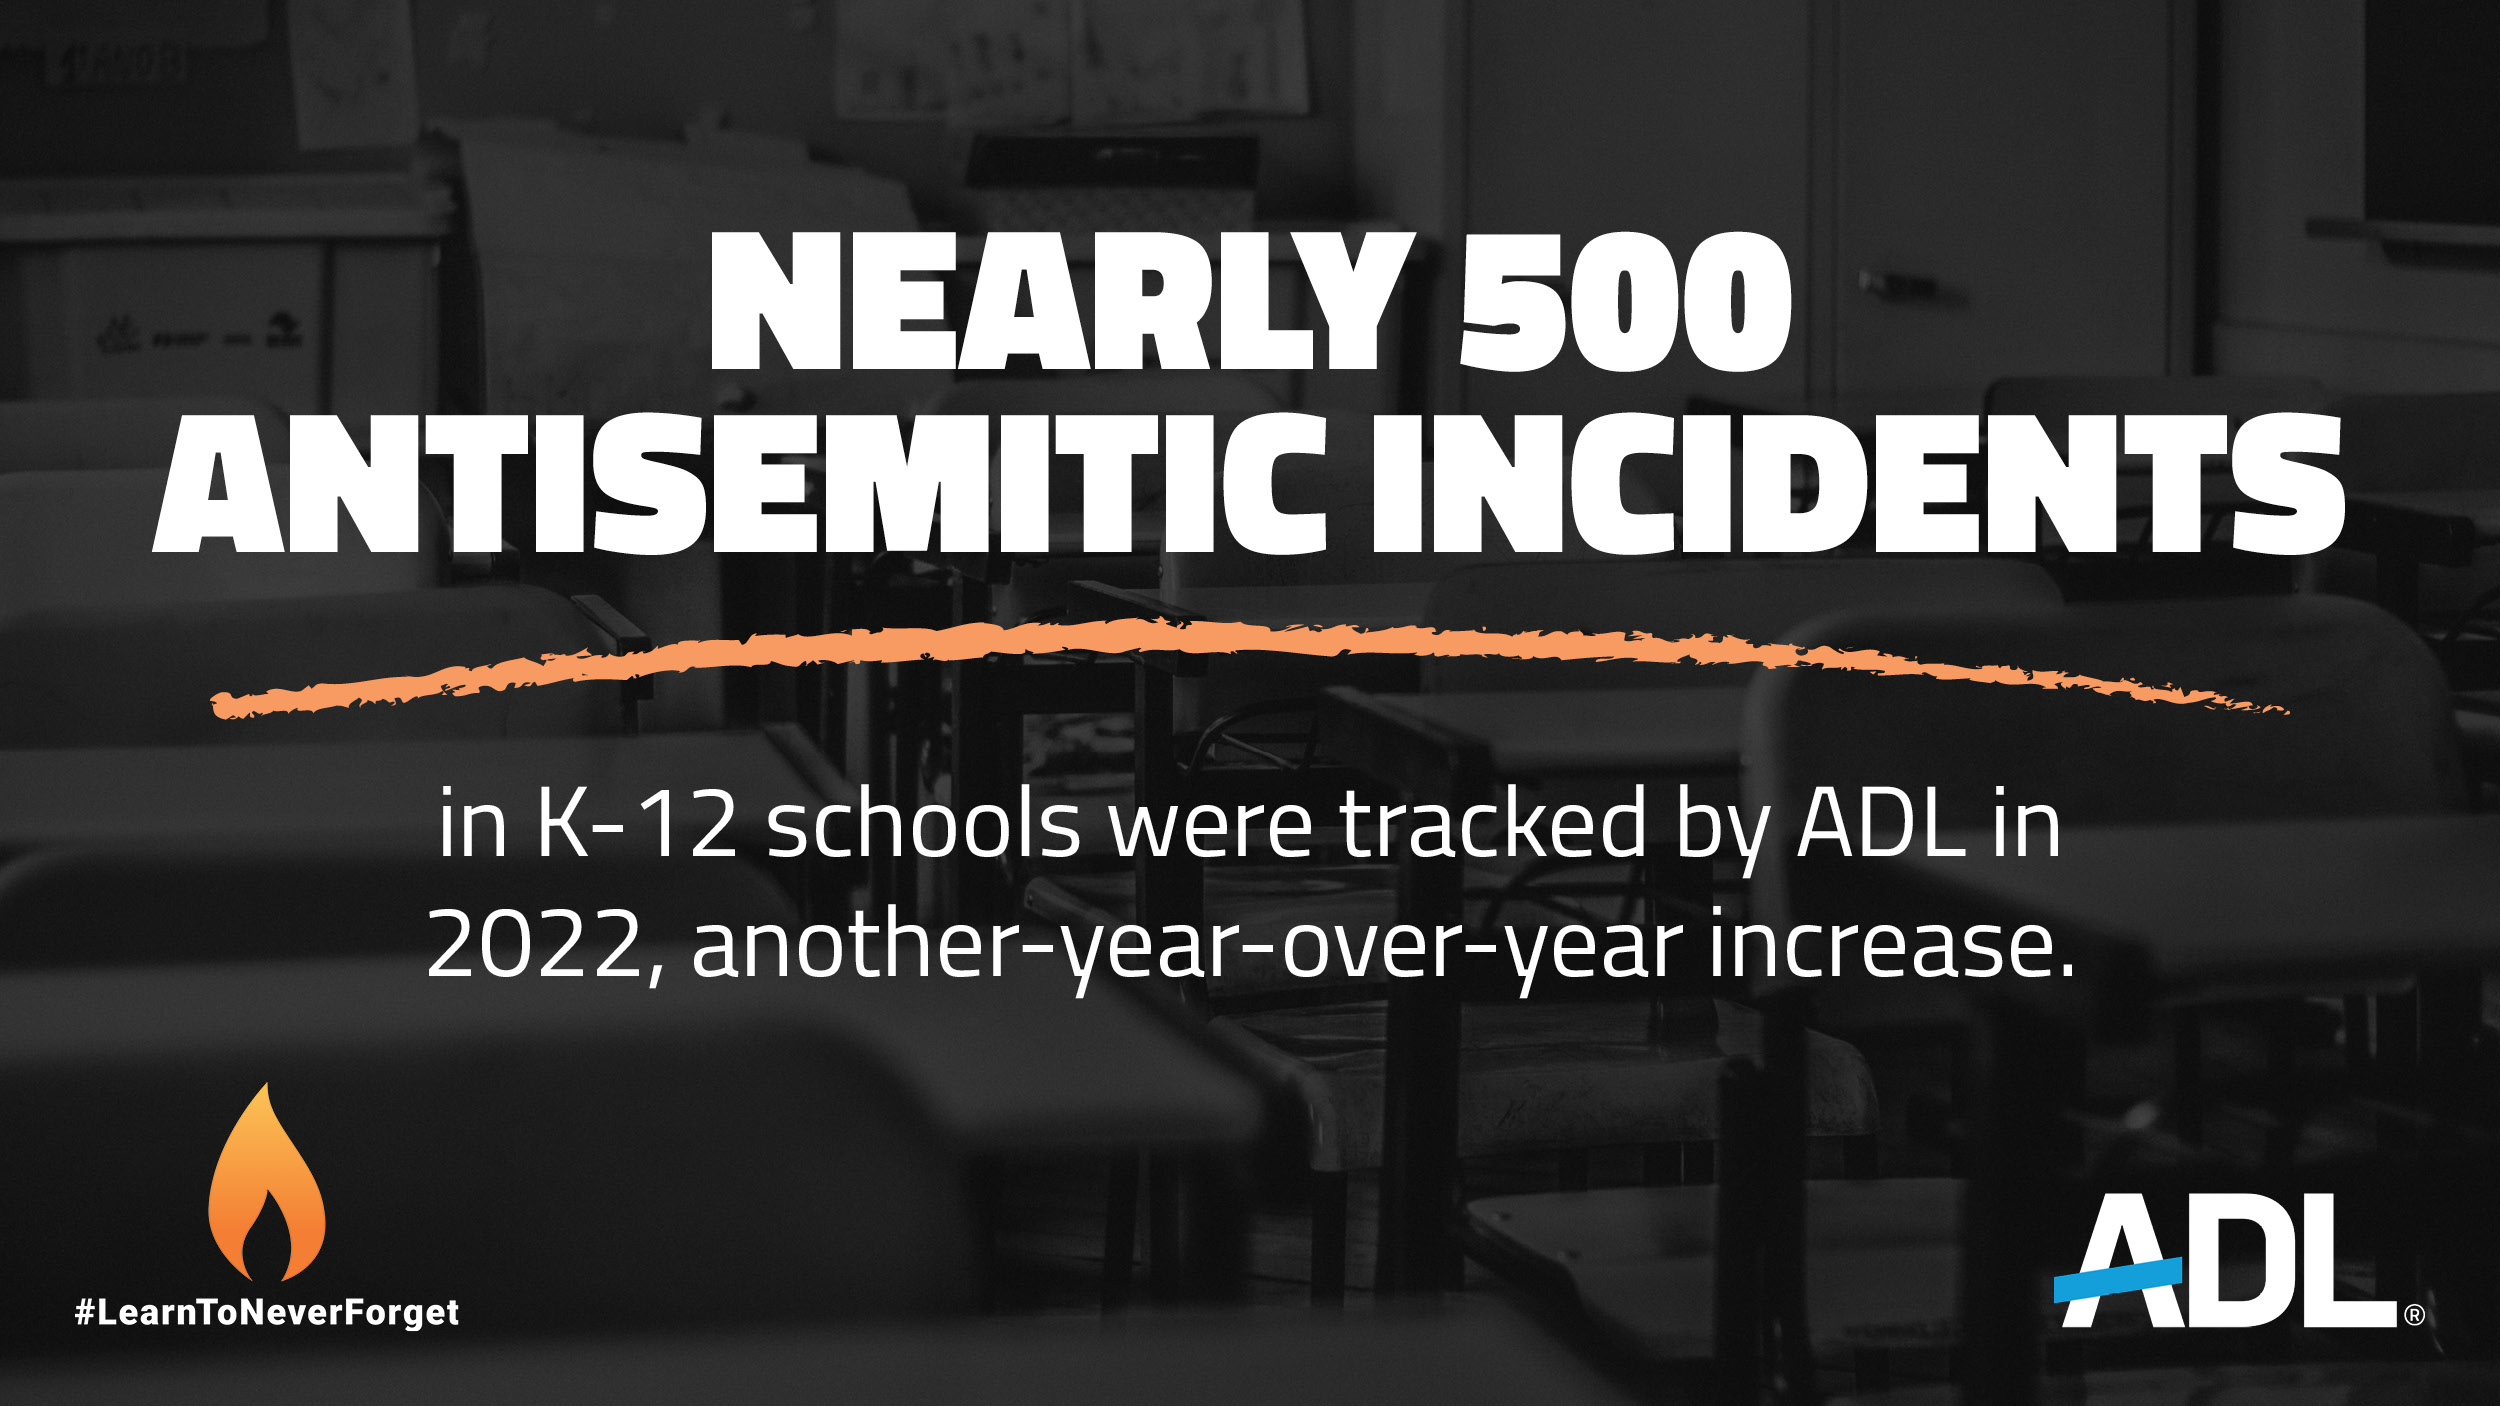 Nearly 500 antisemitic incidents
in K-12 schools were tracked by ADL in 2022, another year-over-year increase. 
#LearnToNeverForget
ADL logo